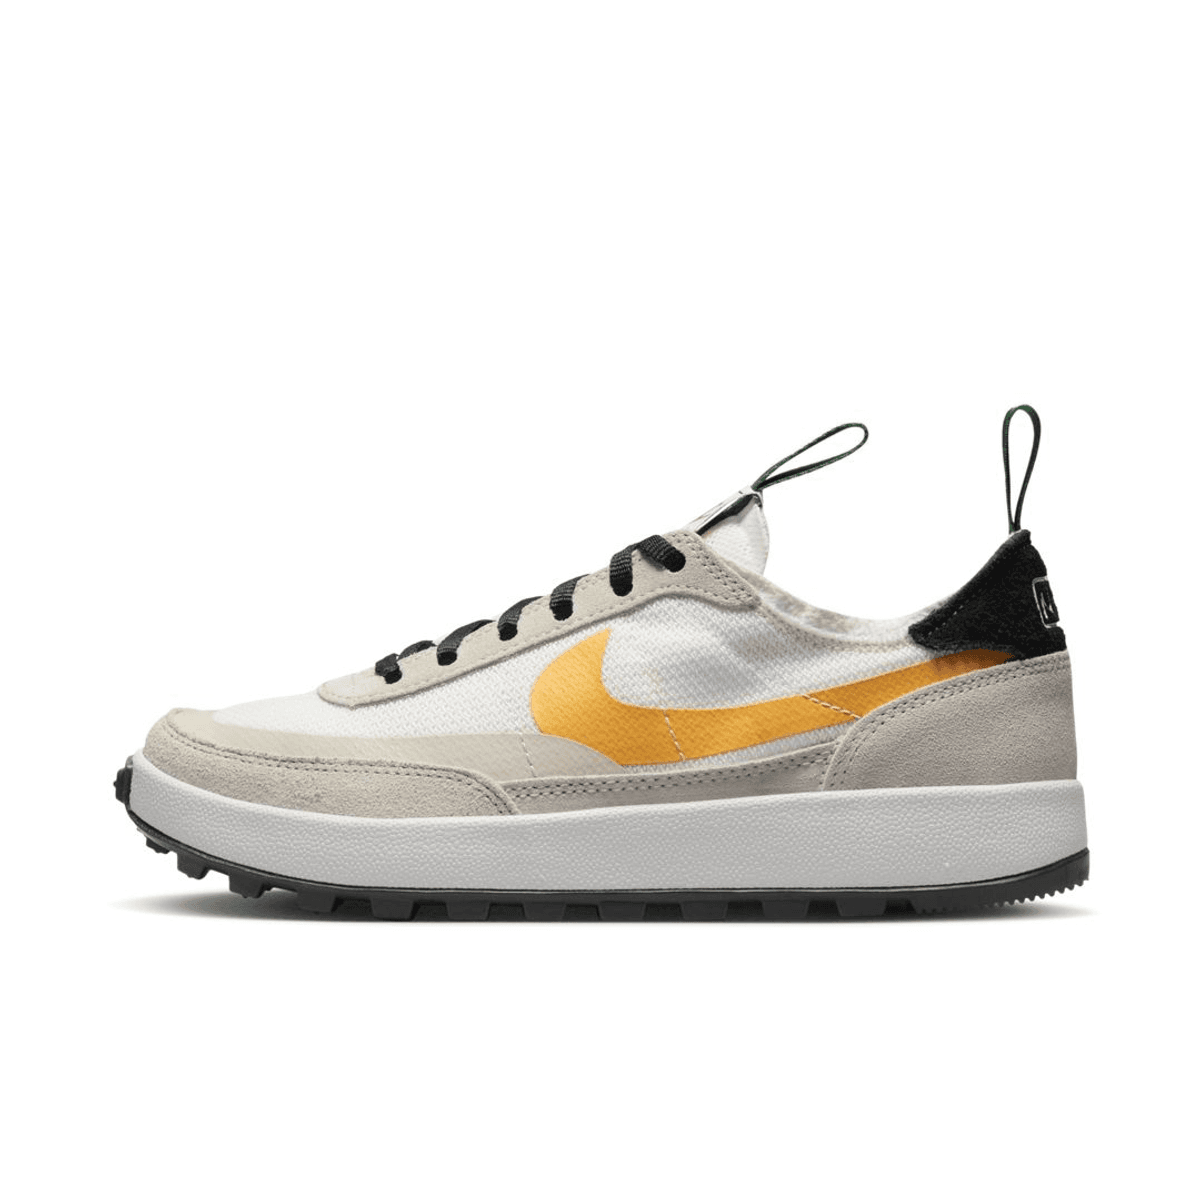 The Tom Sachs x NikeCraft General Purpose Shoe Arrives in Yellow and Green